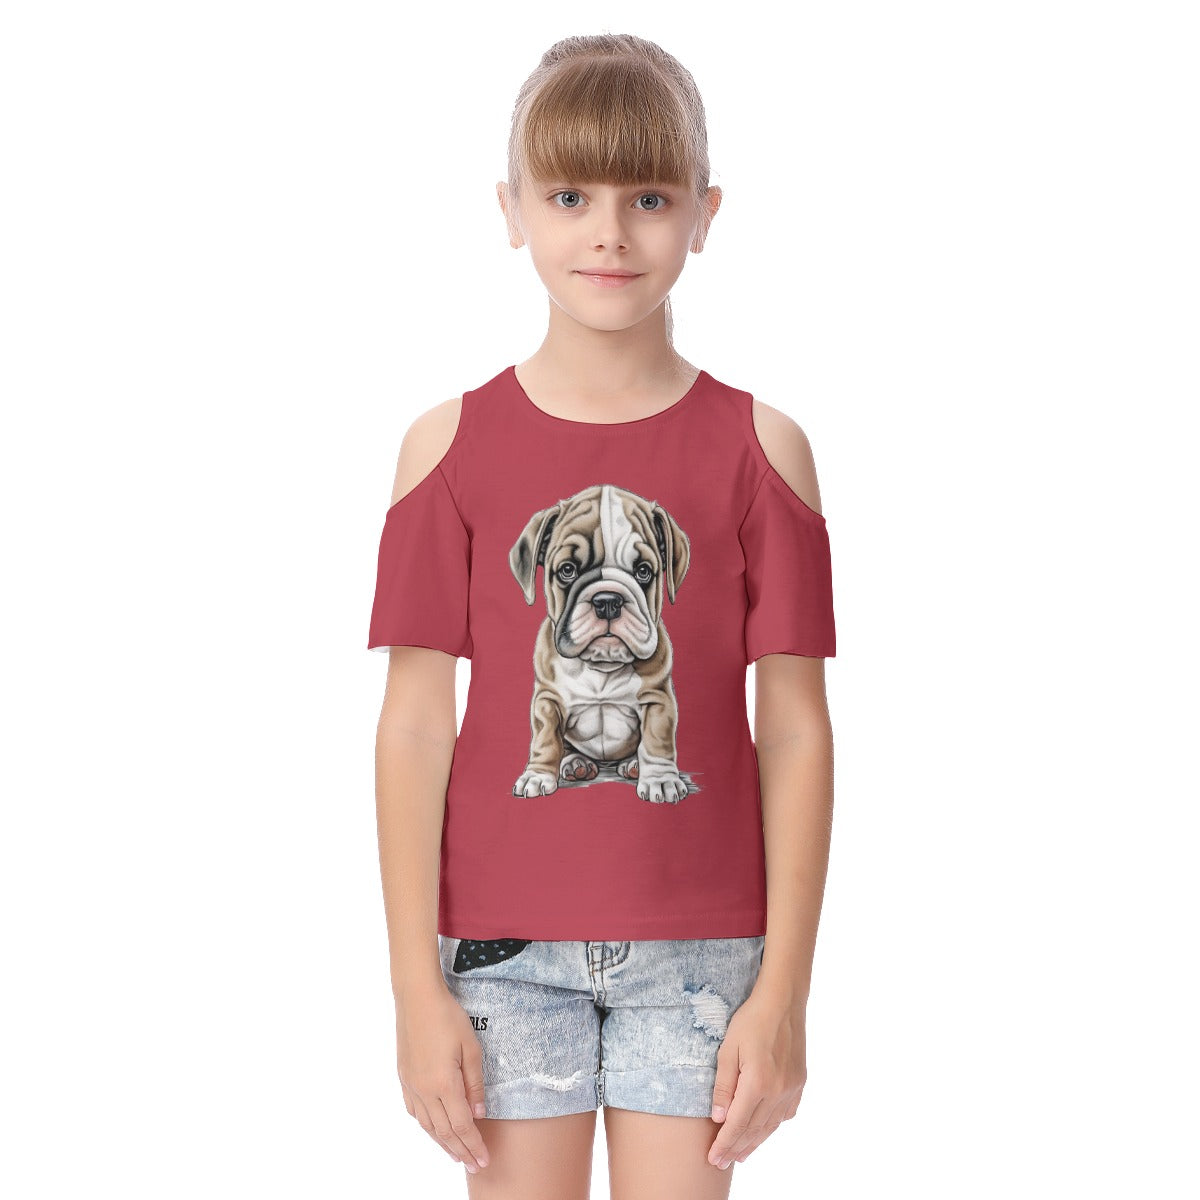 All-Over Print Kid's Cold Shoulder T-shirt With Ruffle Sleeves